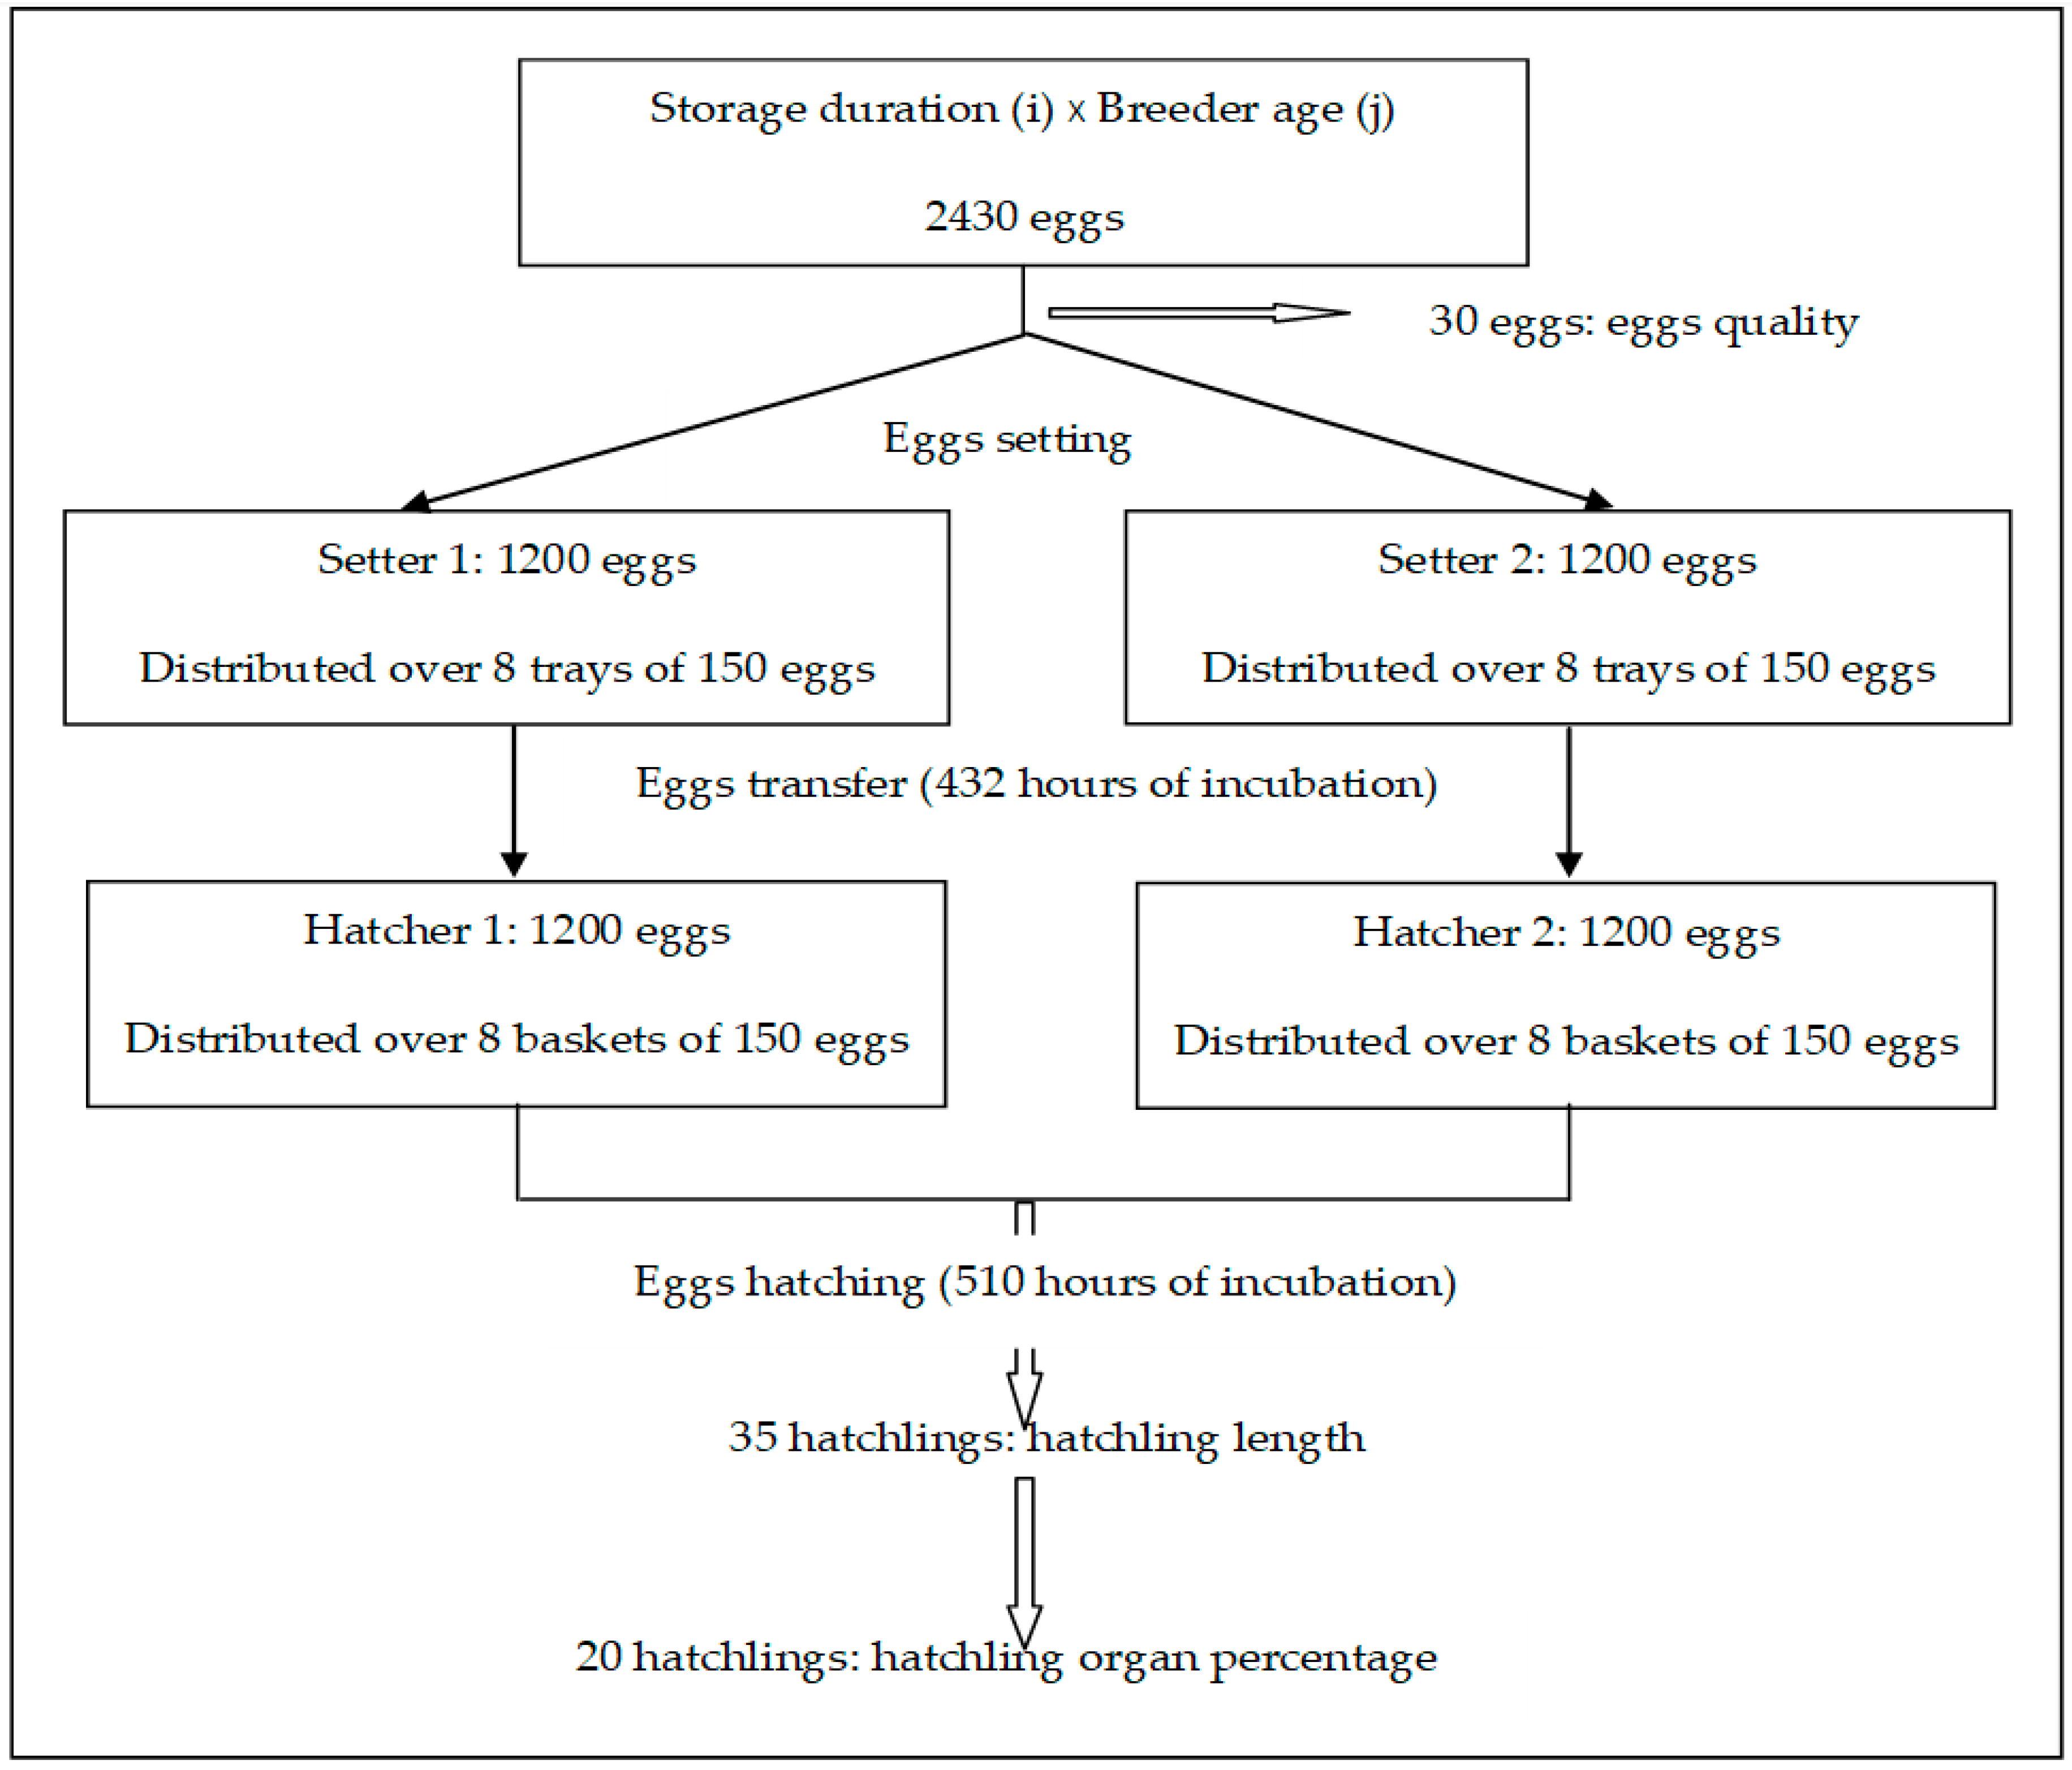 Animals | Free Full-Text | Interactions between Egg Storage Duration and  Breeder Age on Selected Egg Quality, Hatching Results, and Chicken Quality  | HTML